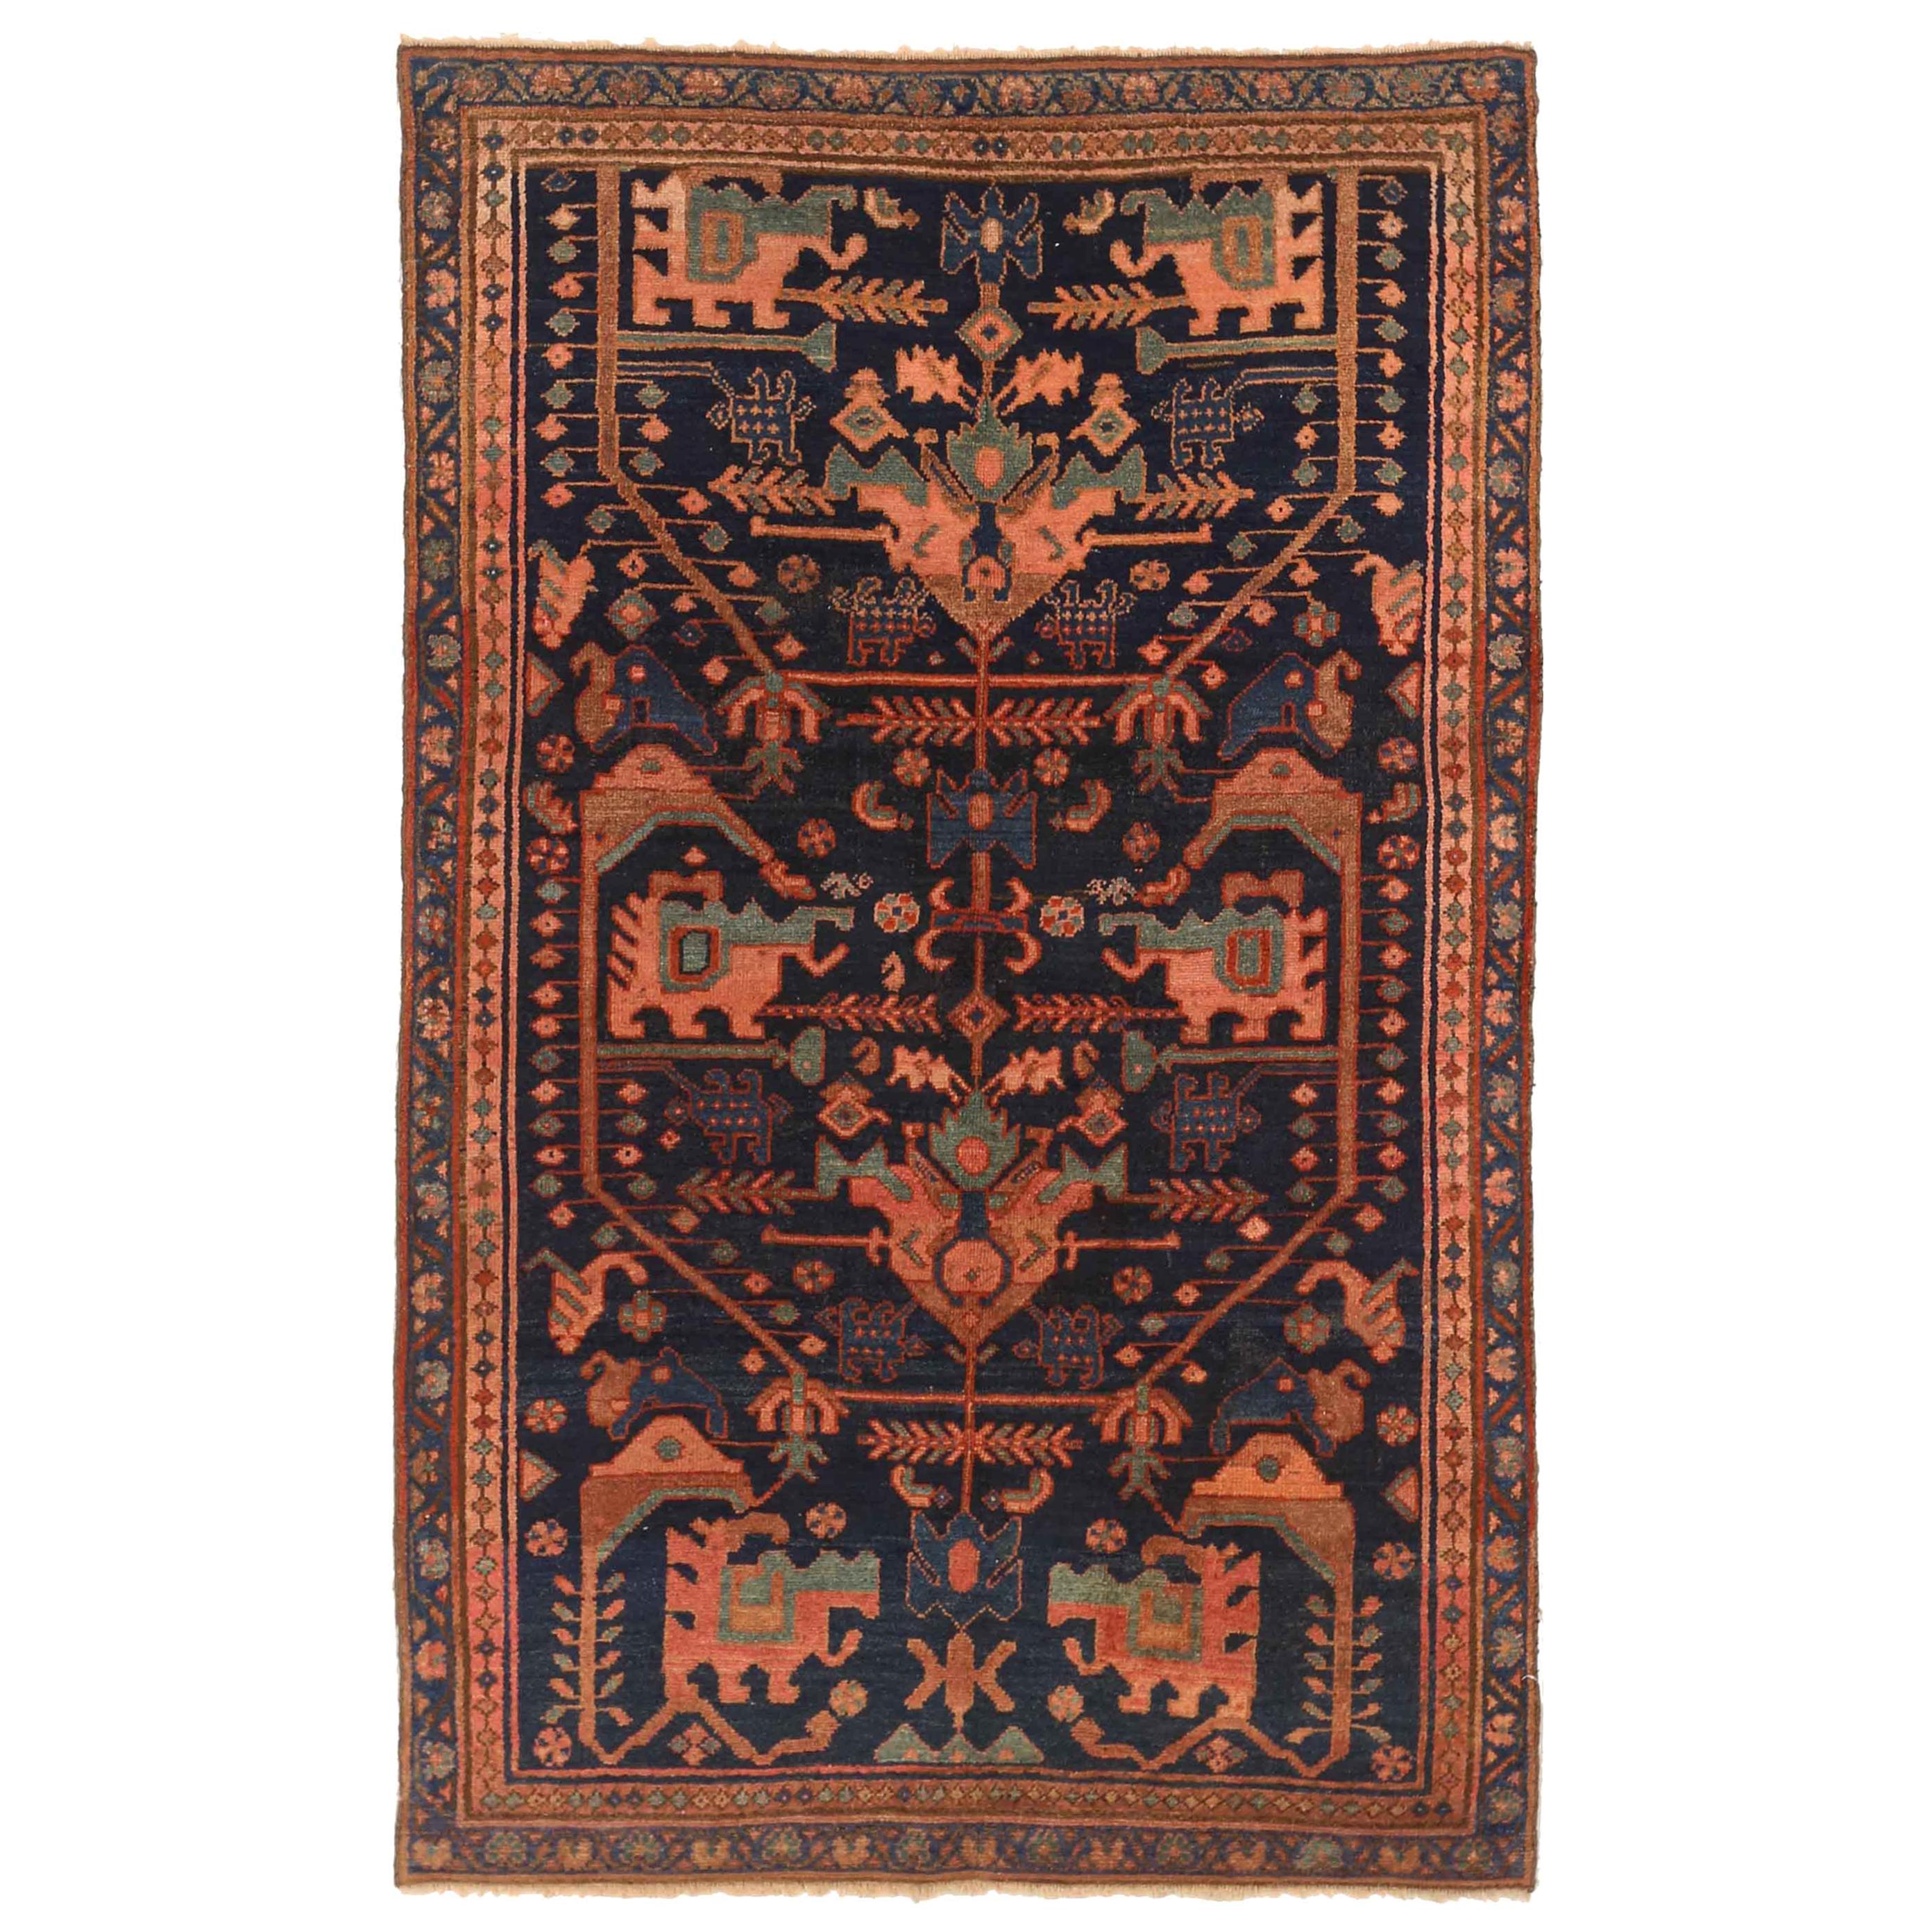 Antique Persian Hamedan Rug with Red and Green Mixed Animal and Floral Patterns For Sale